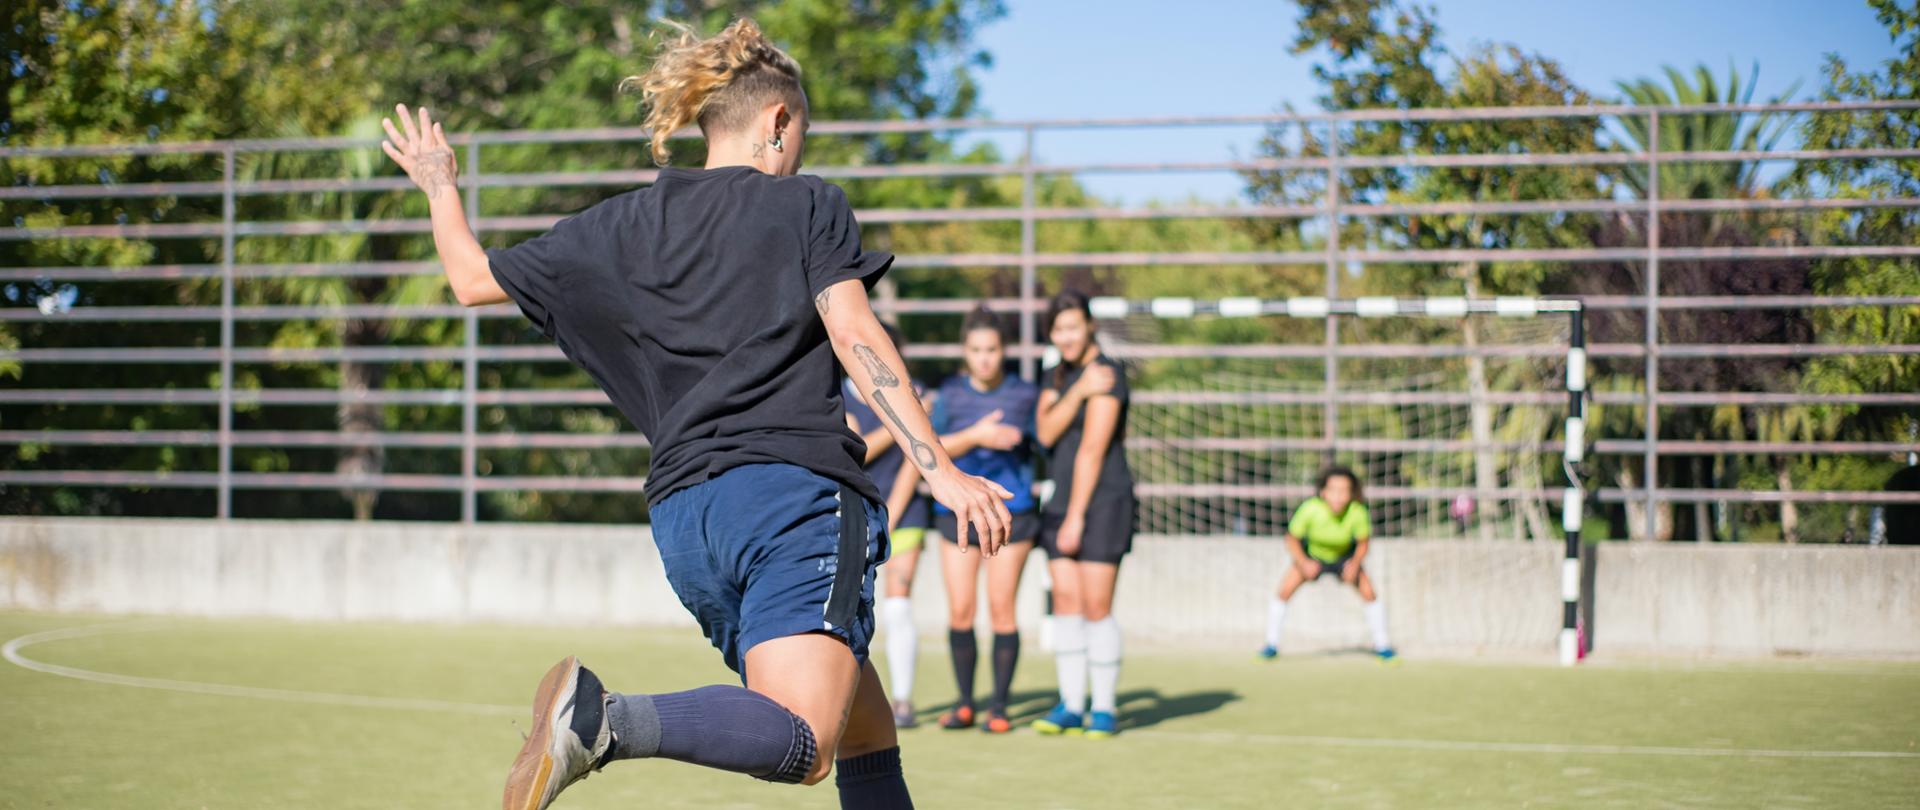 Sporty young woman kicking ball on summer day. Sportswoman in dark uniform kicking ball in direction of football goals, teammates in background. Sport, leisure, active lifestyle concept